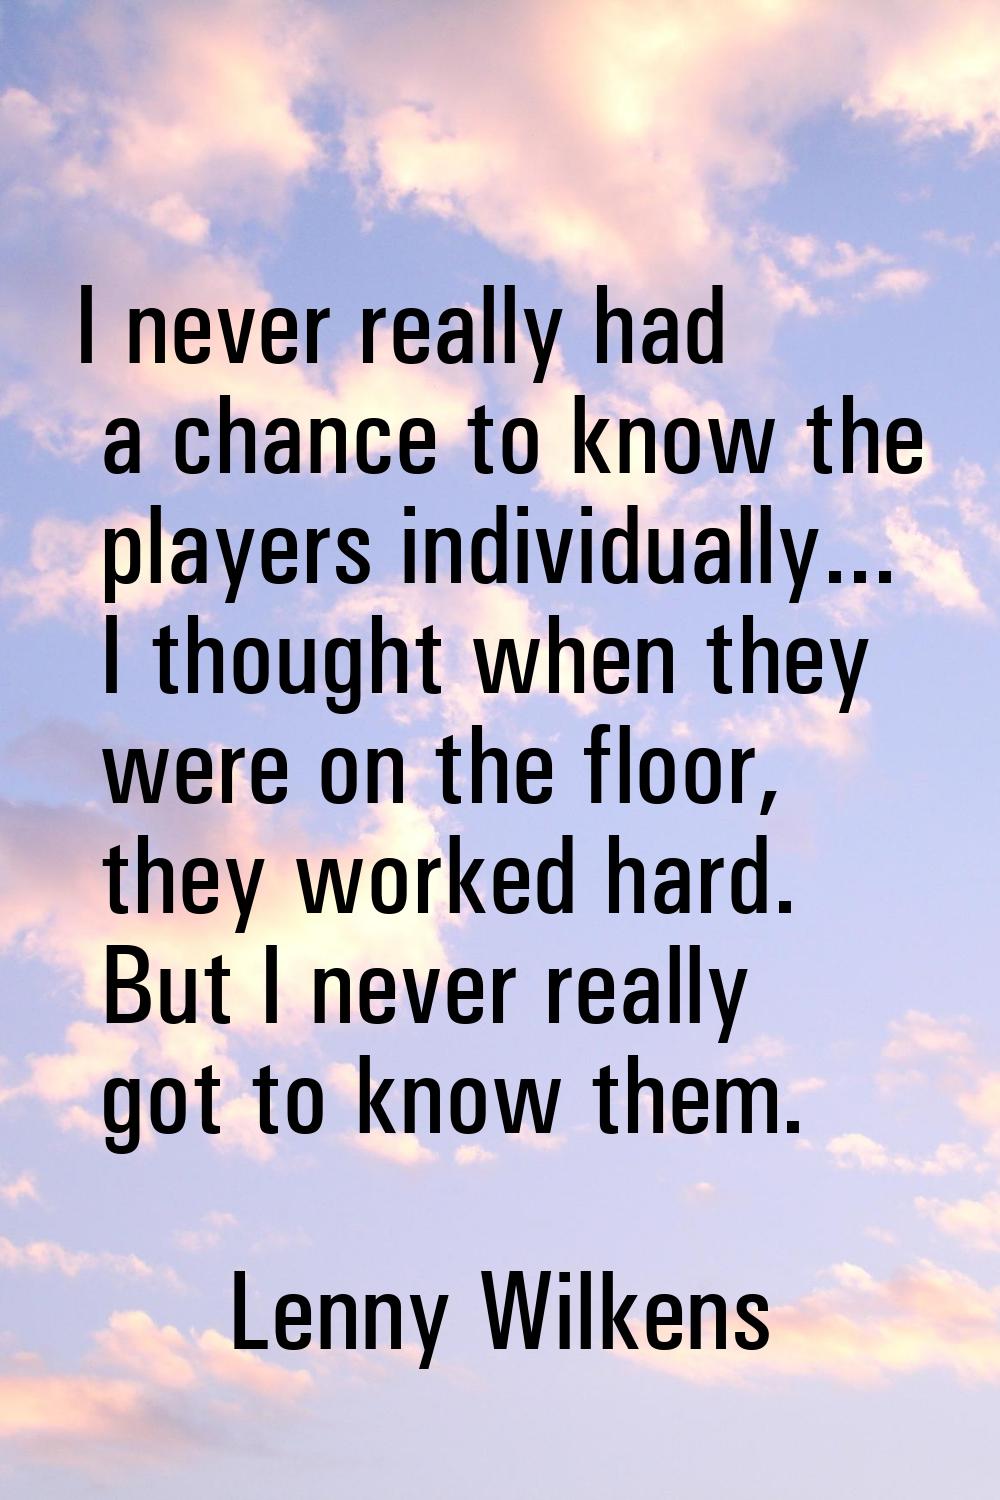 I never really had a chance to know the players individually... I thought when they were on the flo